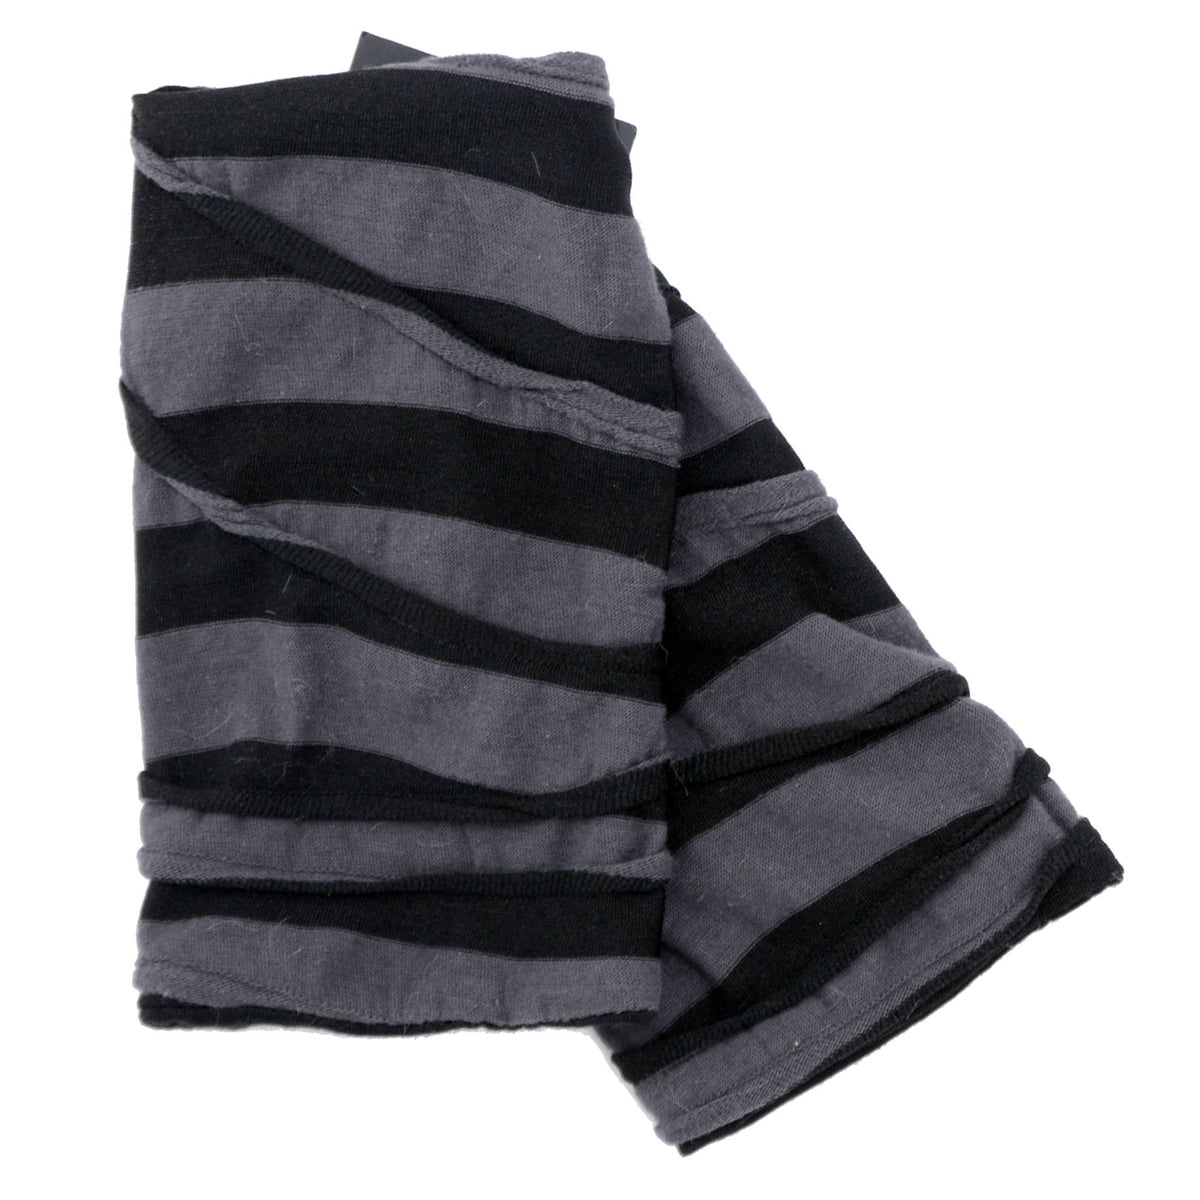 Fingerless Gloves, Asst. - Desert Nights with Abyss Jersey Knit (Sold out!)